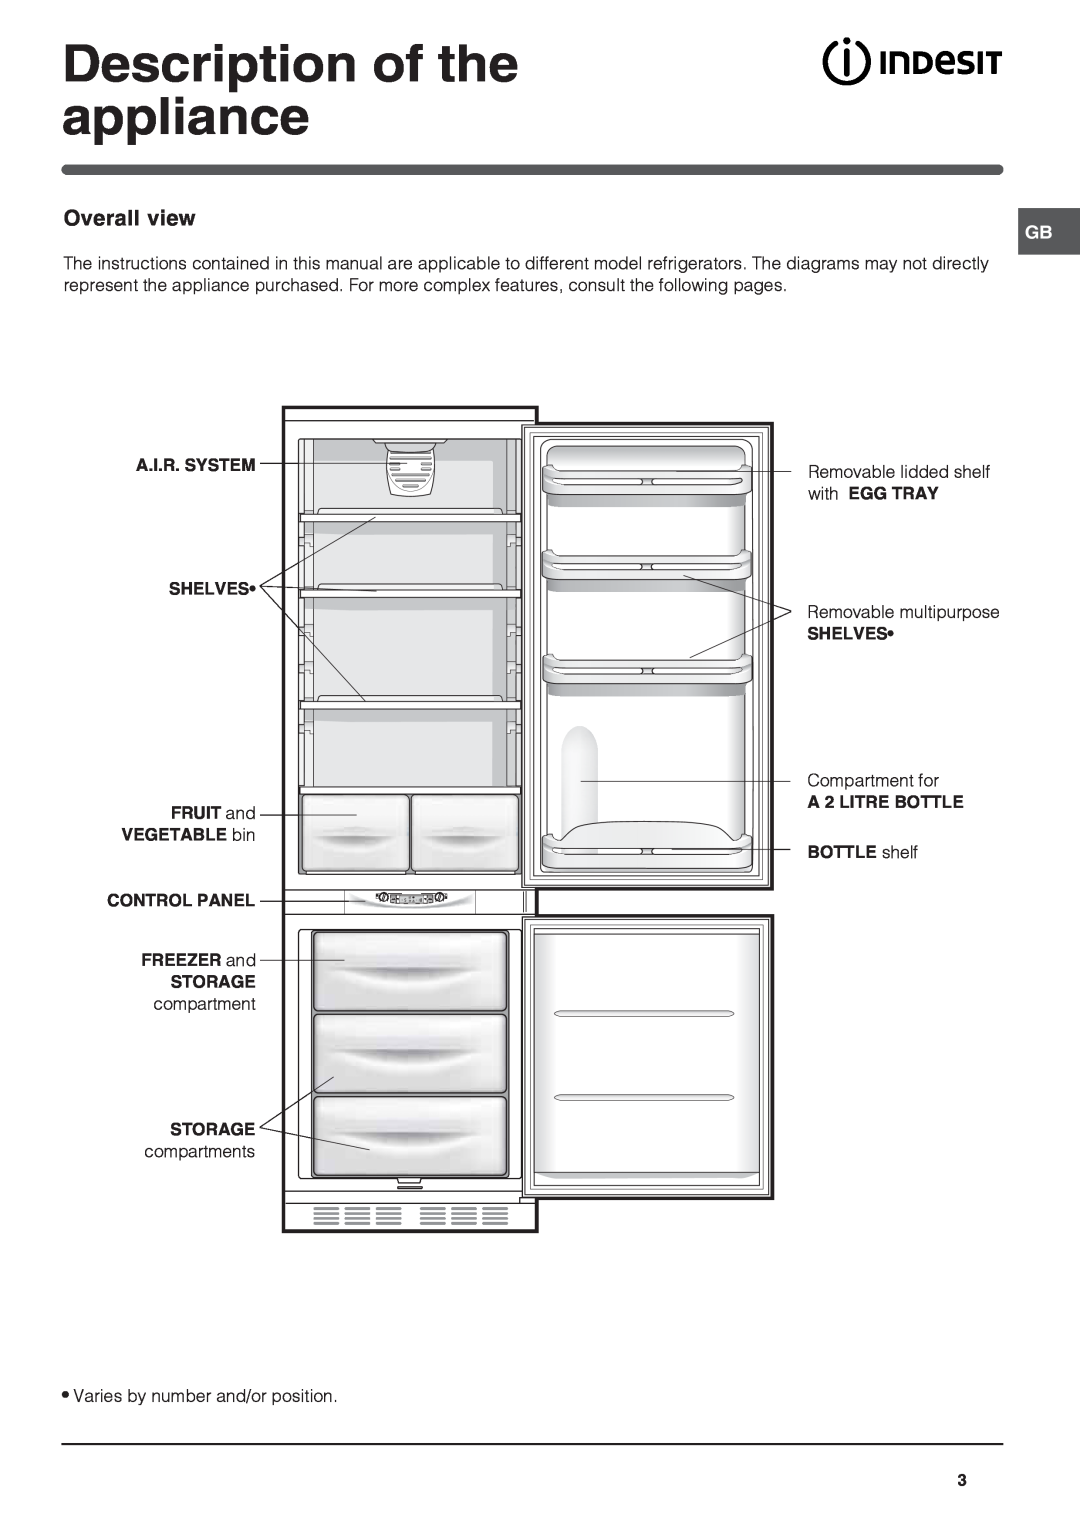 Indesit IN CH 310 AA VE I UK manual Description of the appliance, Overall view, FREEZER and STORAGE compartment, Shelves 